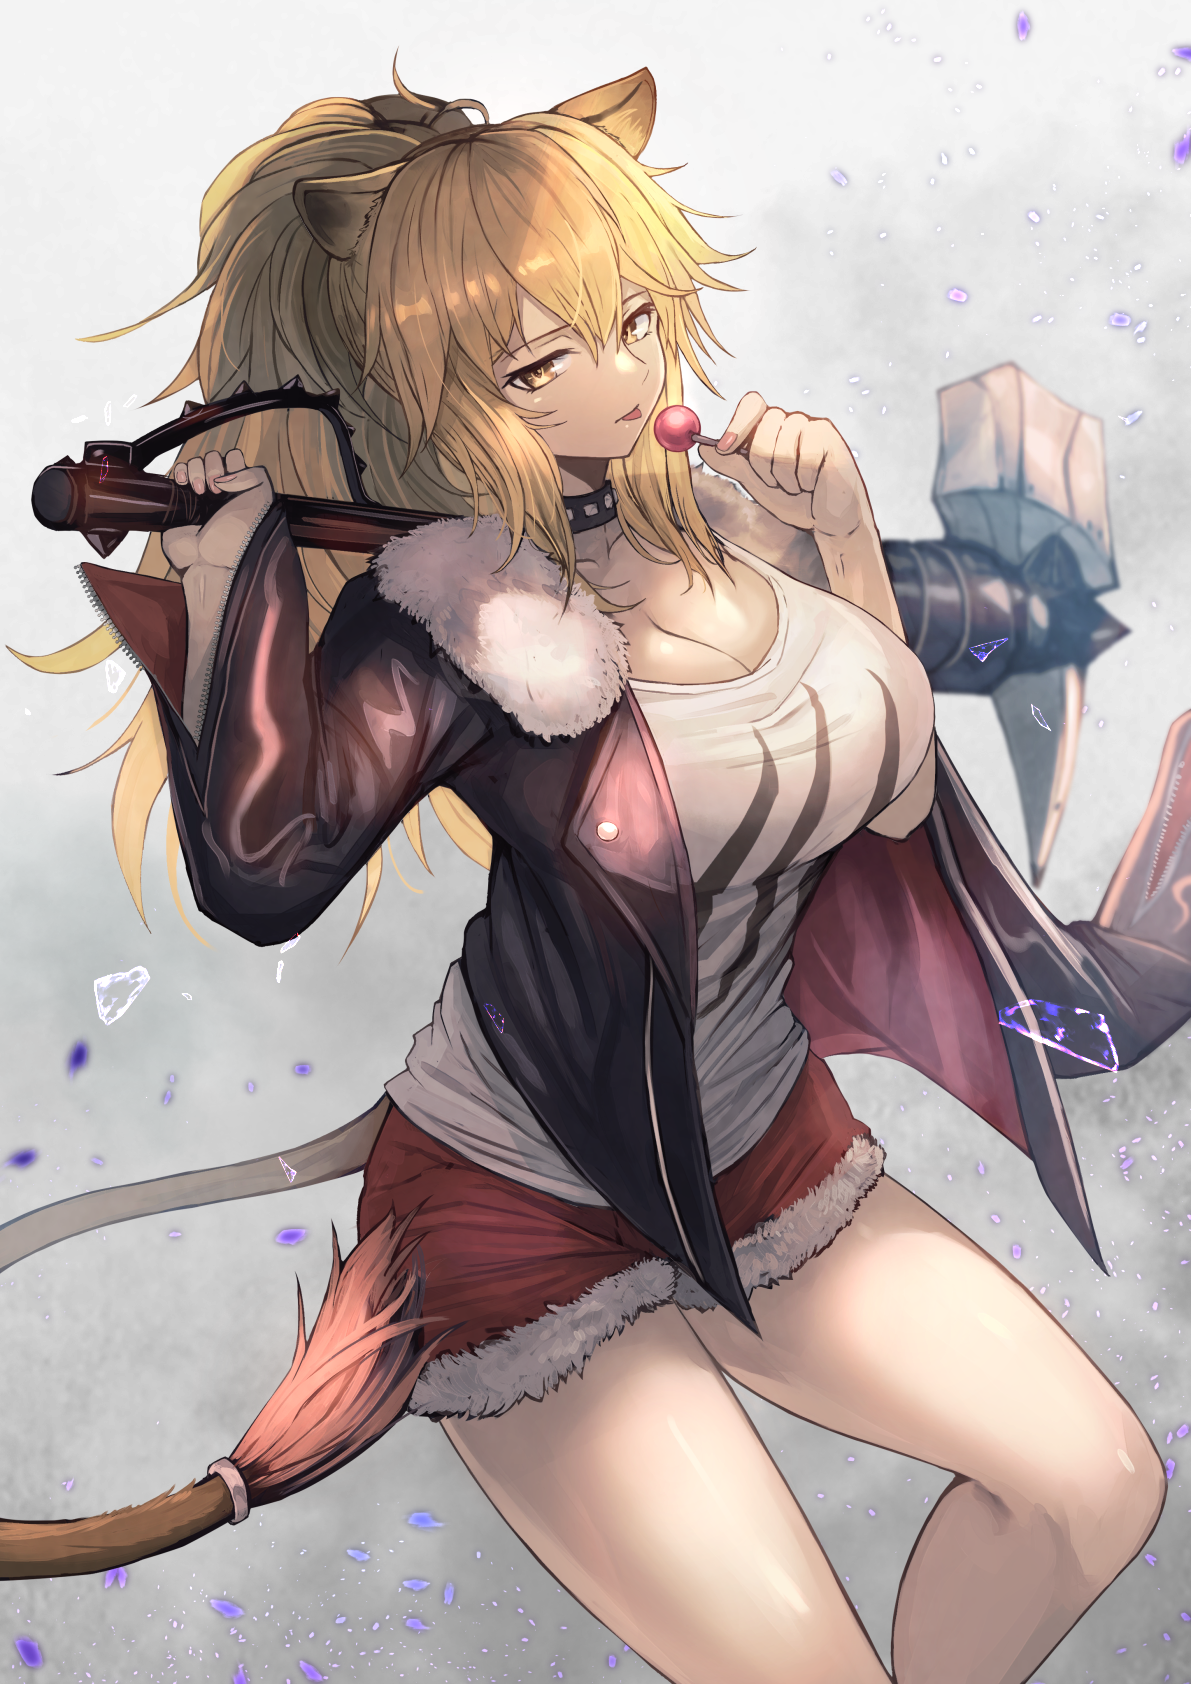 Anime 1191x1684 anime anime girls digital art artwork 2D portrait display Arknights Siege(Arknights) big boobs Ohako animal ears tail cat girl lollipop blonde ponytail yellow eyes tongue out open jacket cleavage short shorts hammer